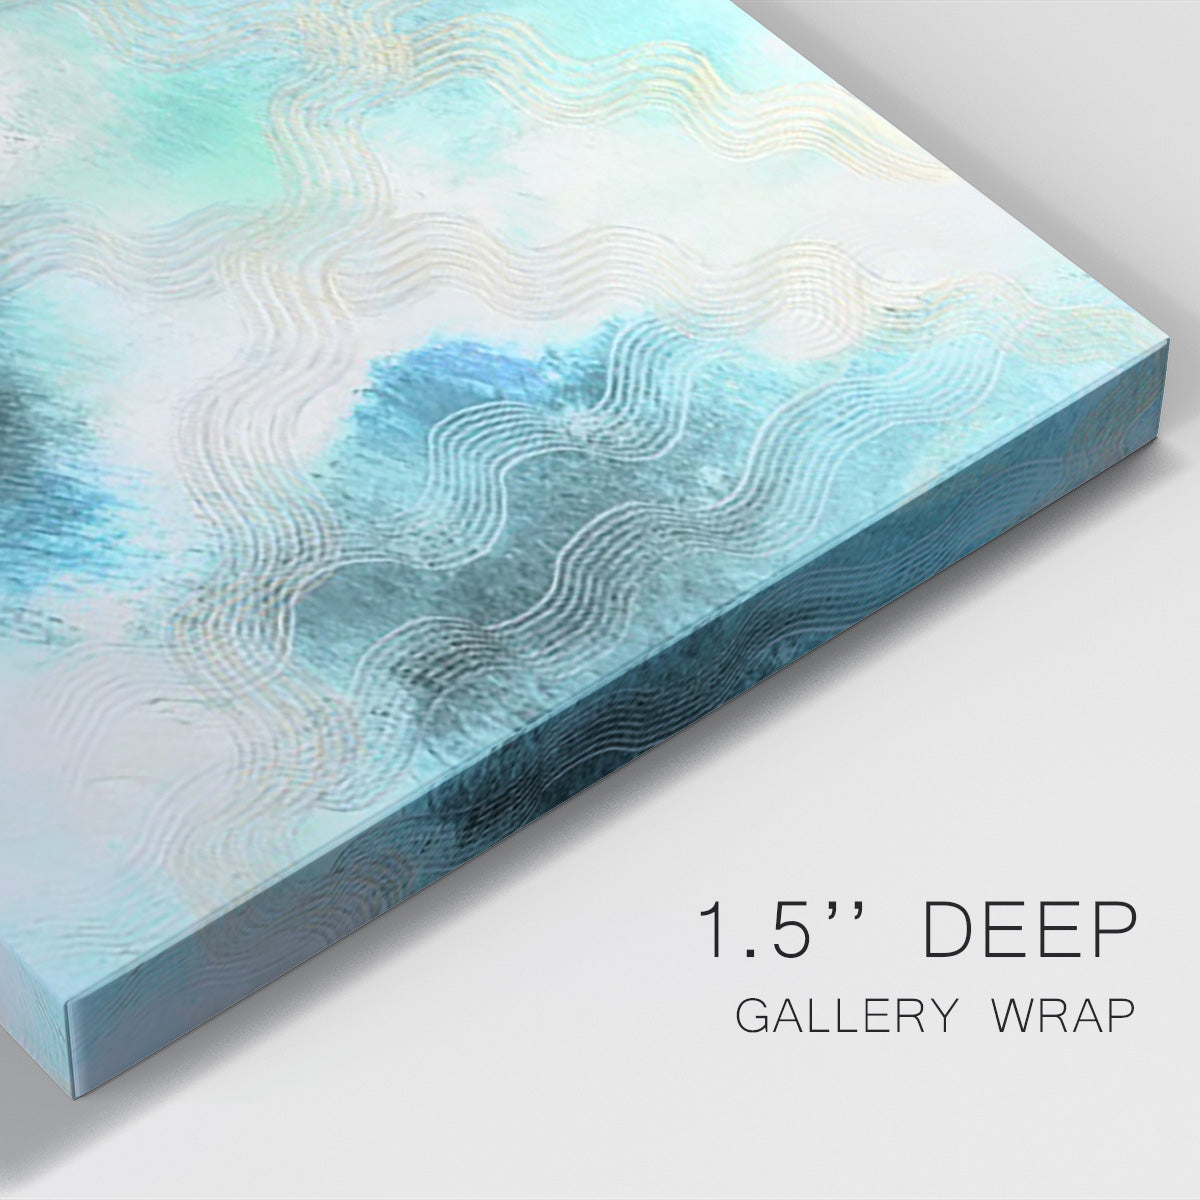 Blue Shift I Premium Gallery Wrapped Canvas - Ready to Hang